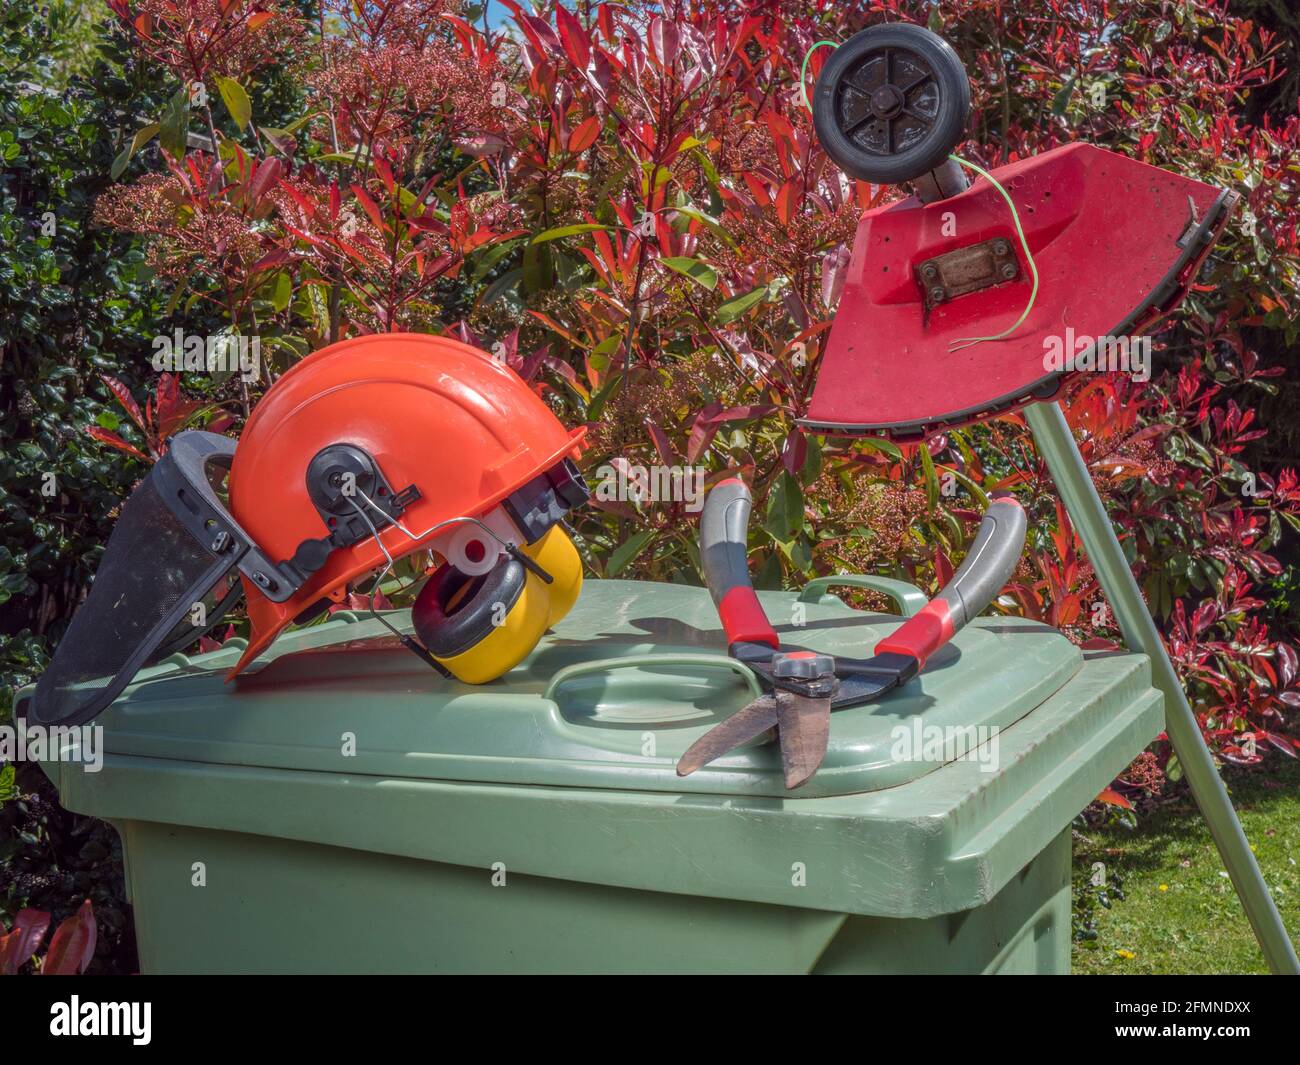 Closeup of gardening equipment – hard hat, shears and a strimmer - resting on a green wheely bin, with colourful bushes in the background. Stock Photo